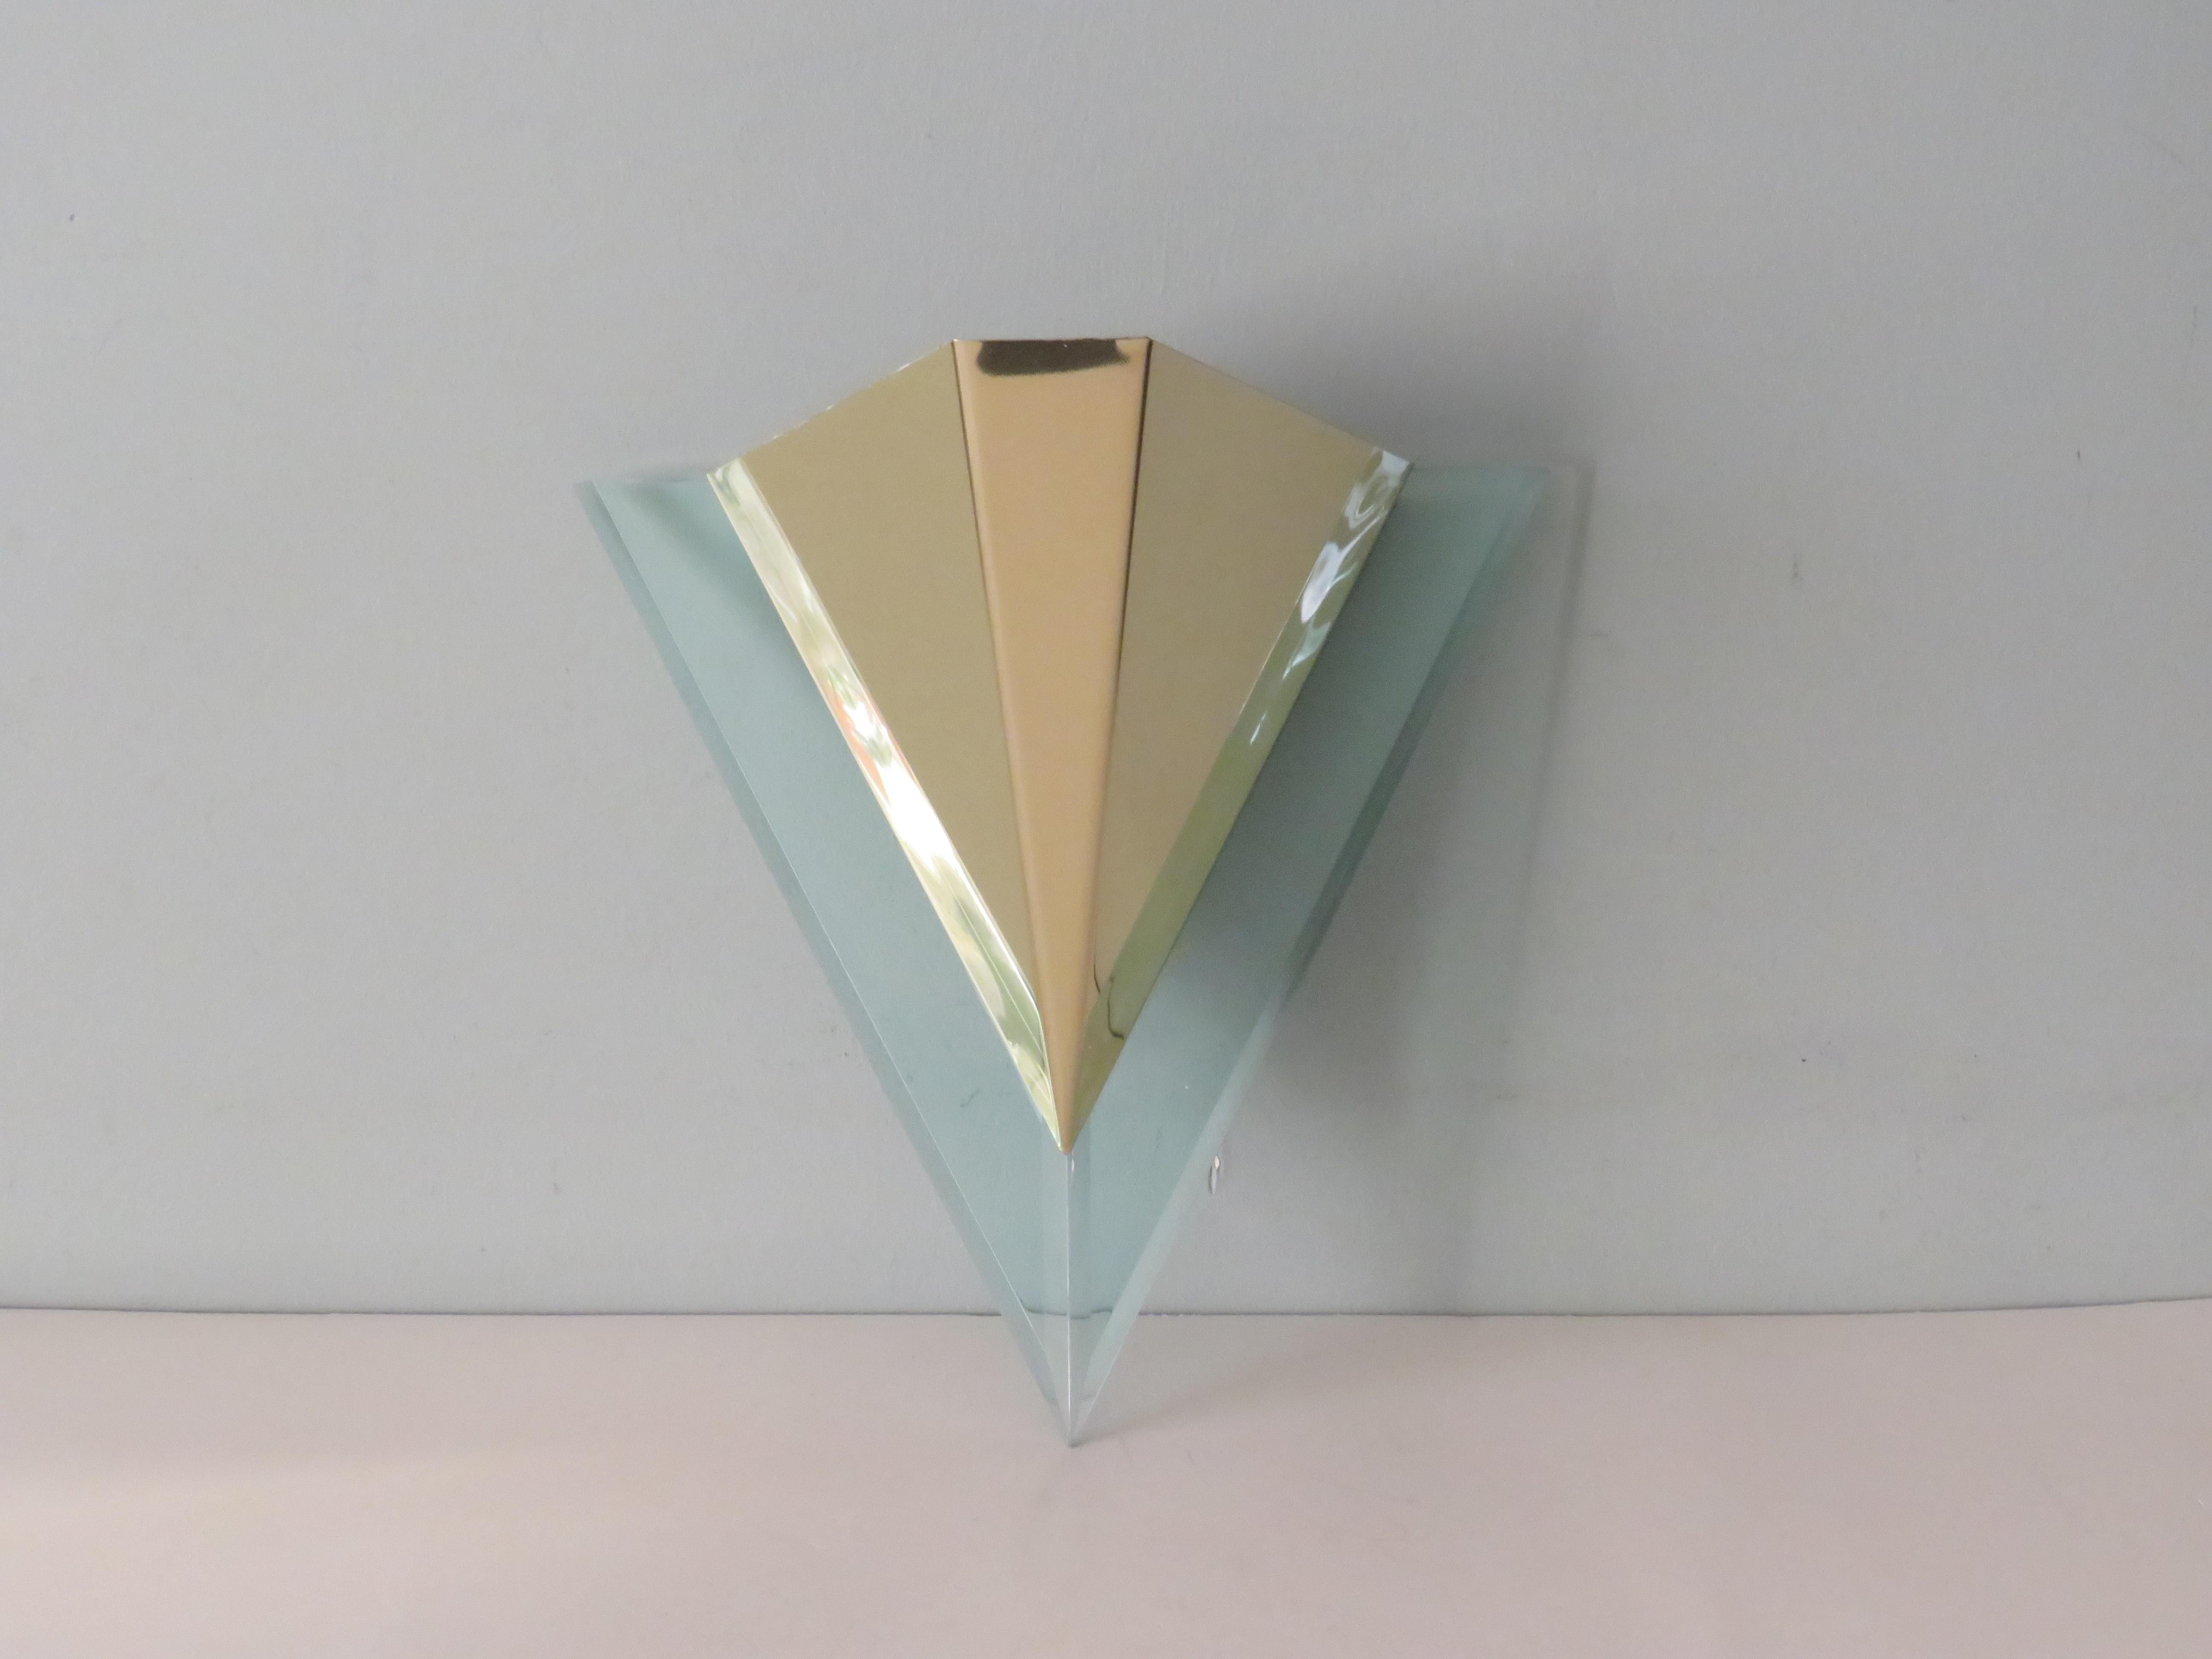 Triangular wall lamp made of perspex and gold-colored metal.
The lamp has 1 E 27 fitting.
This lamp comes from an old-new stock and has also not been used yet, the lamp will be delivered with the original box and all original mounting materials.